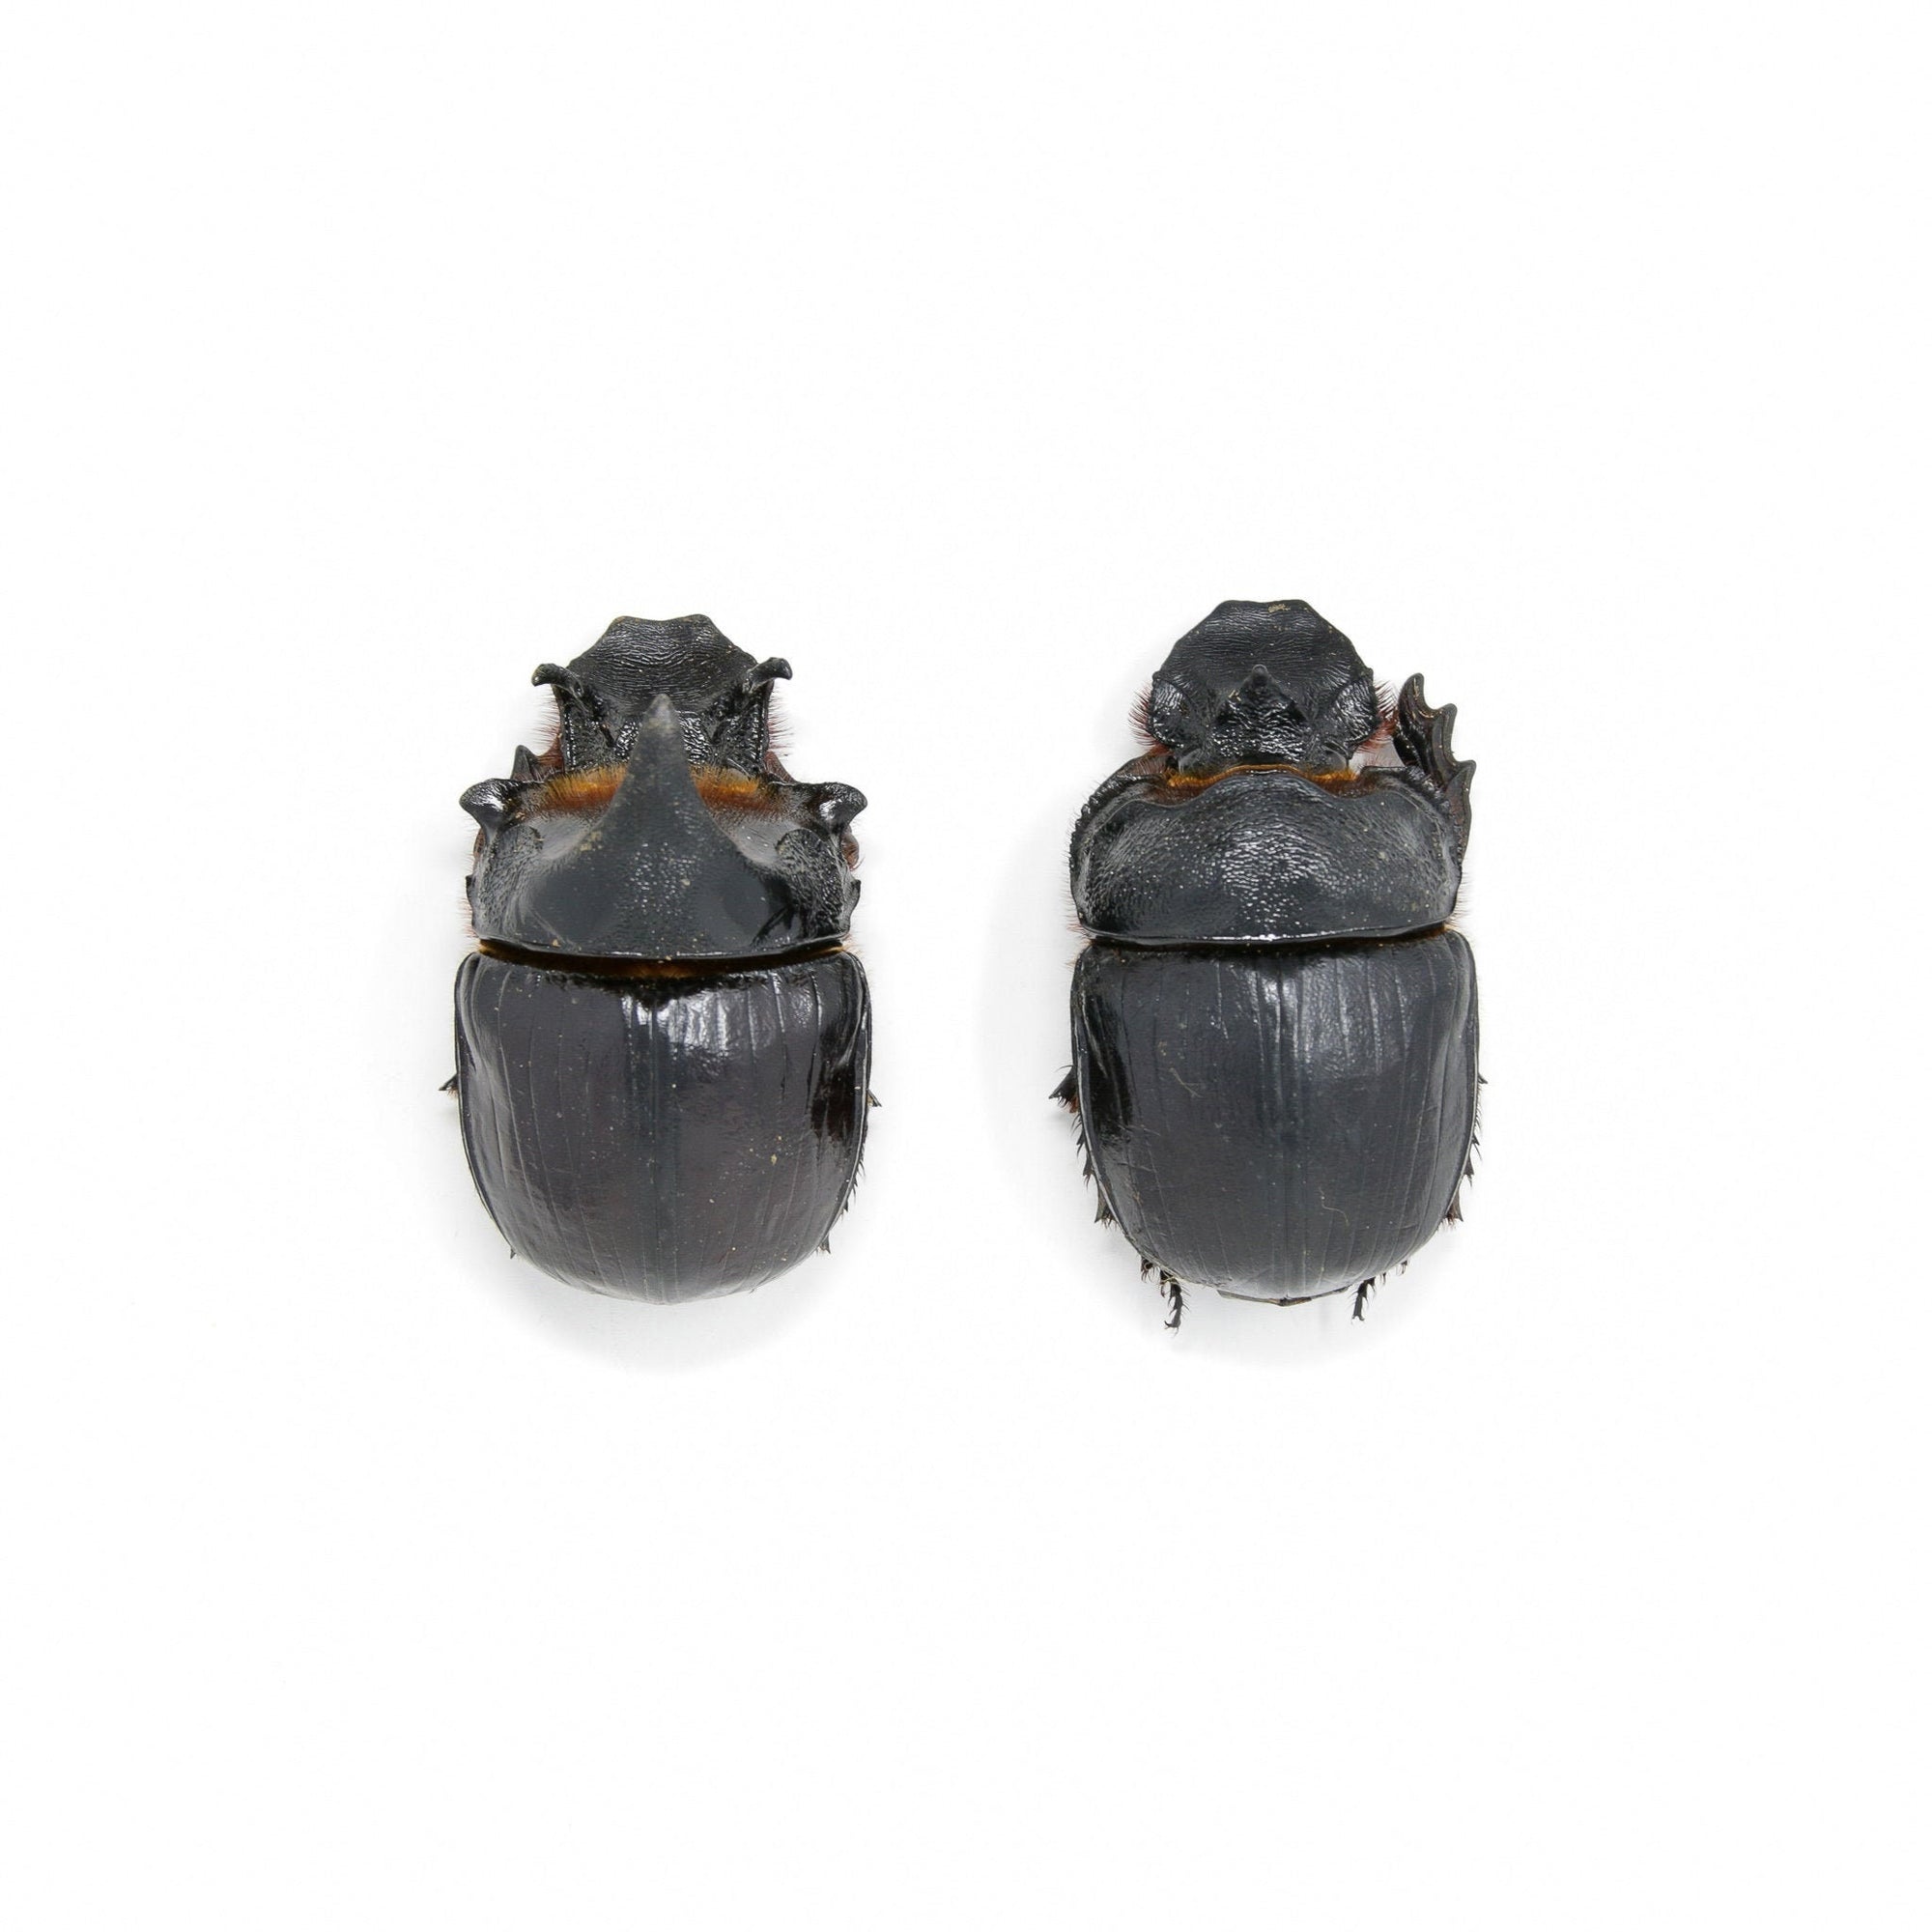 Pair Elephant Dung Beetles (Heliocopris dominus) GAINT SCARAB BEETLE A1 Quality, Entomology Real Insects, Dry Preserved Specimens